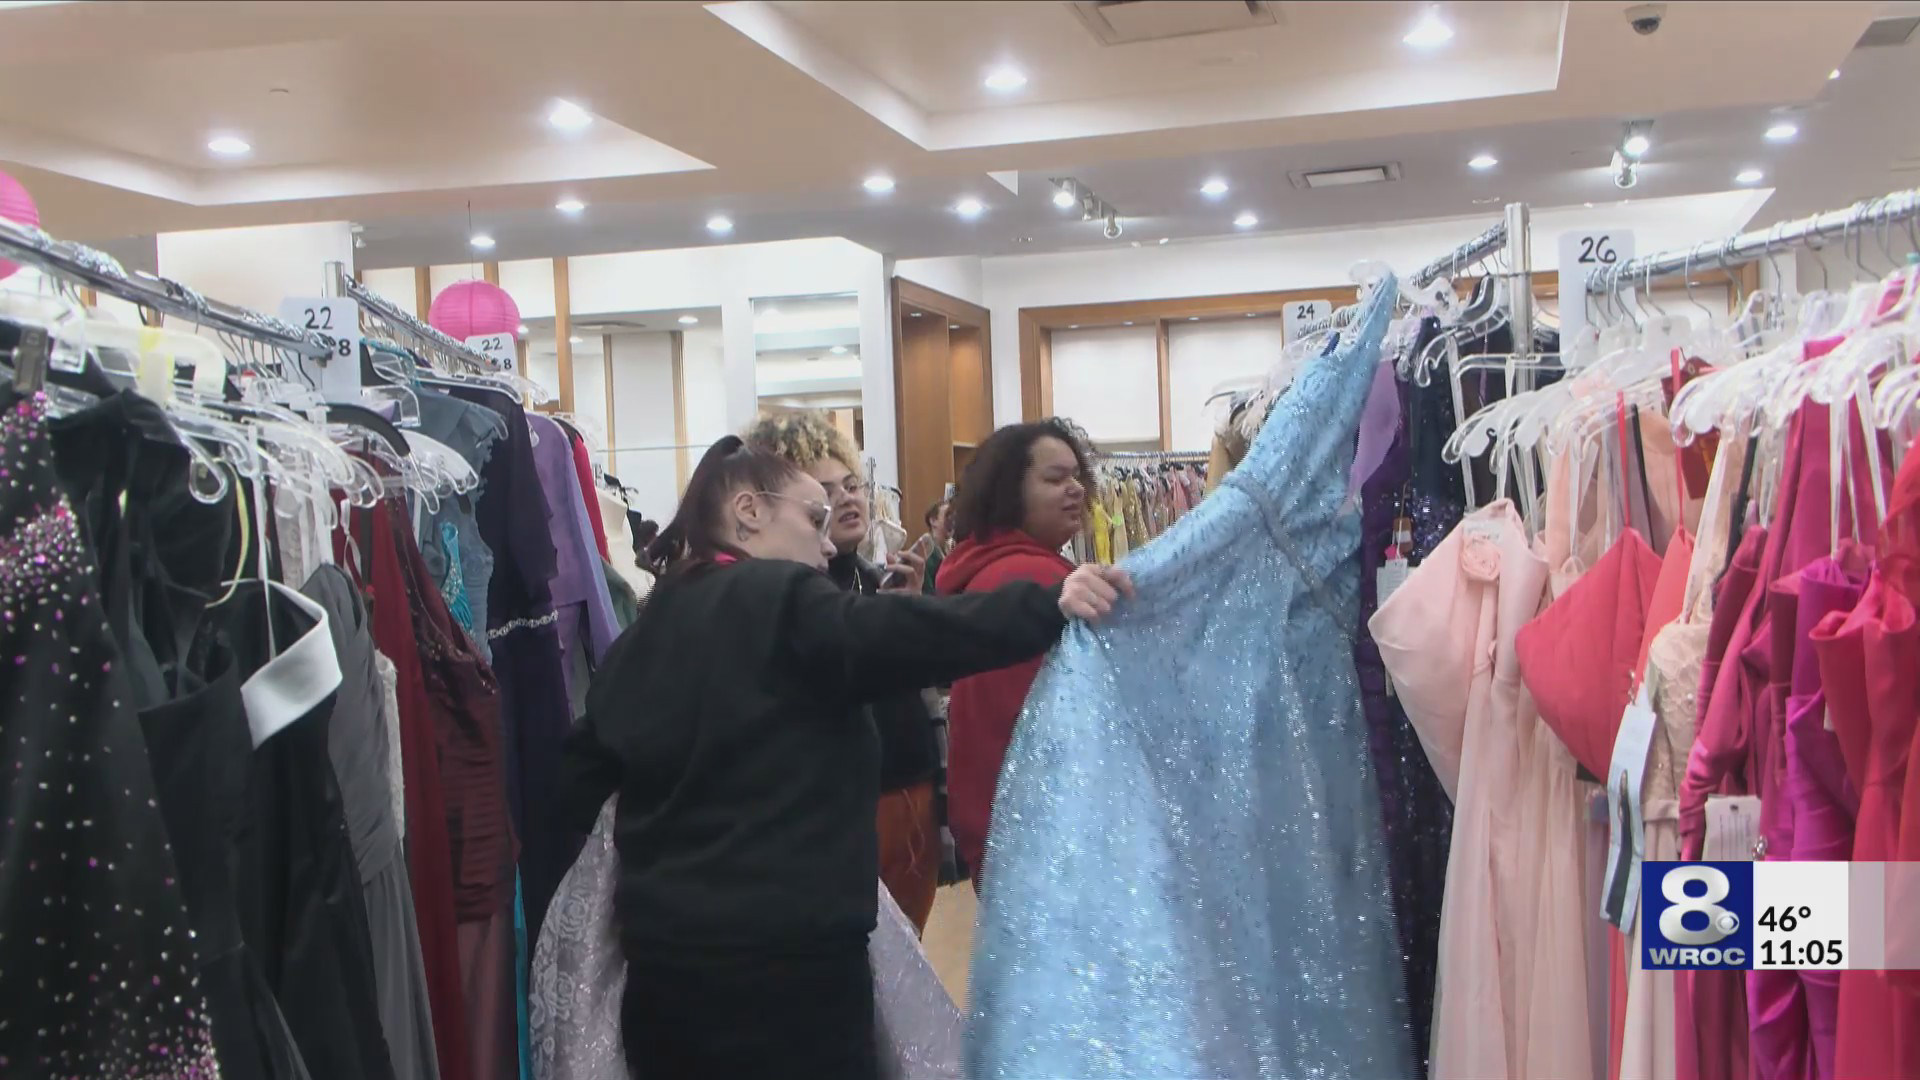 Fairy Godmothers help hundreds find their dream prom dresses